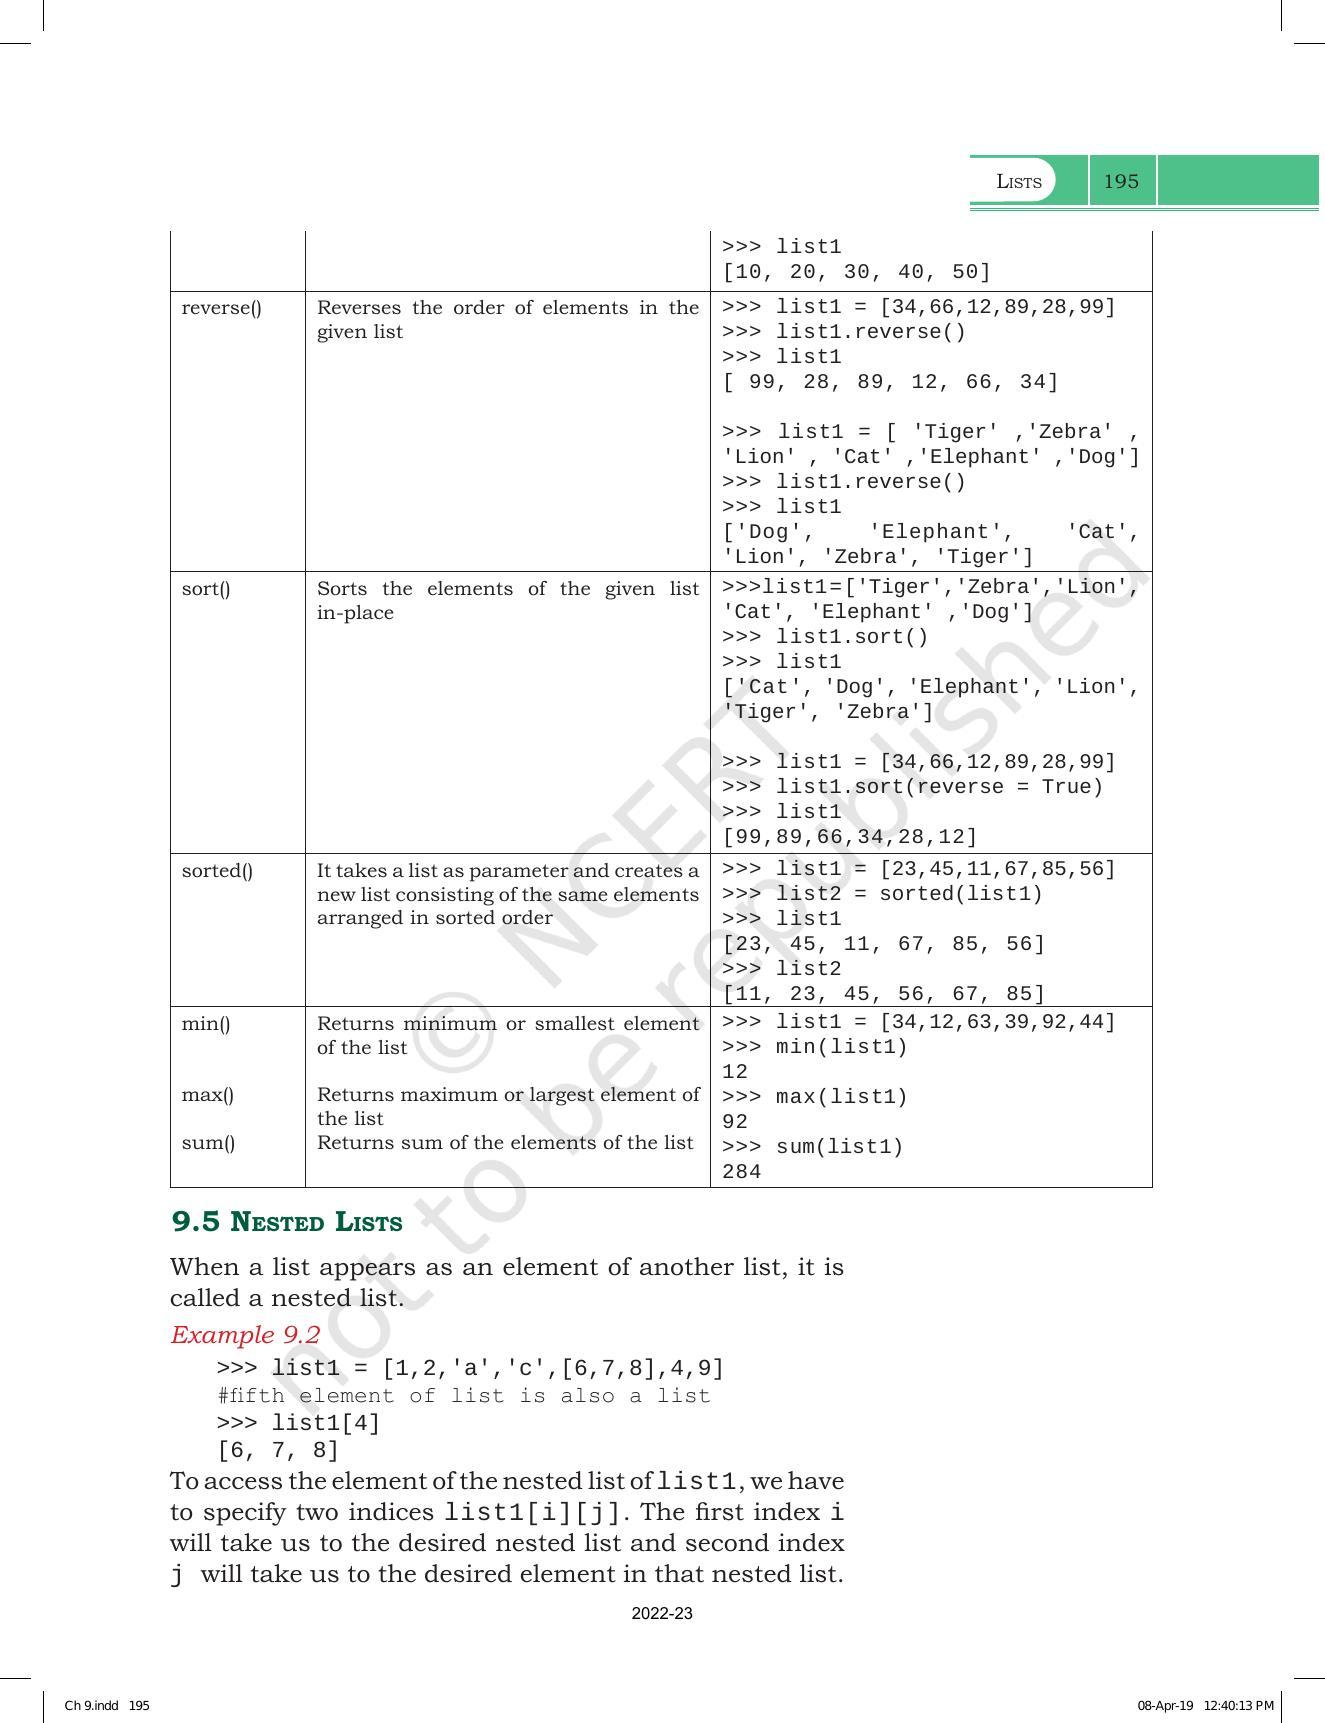 NCERT Book for Class 11 Computer Science Chapter 9 Lists - Page 7